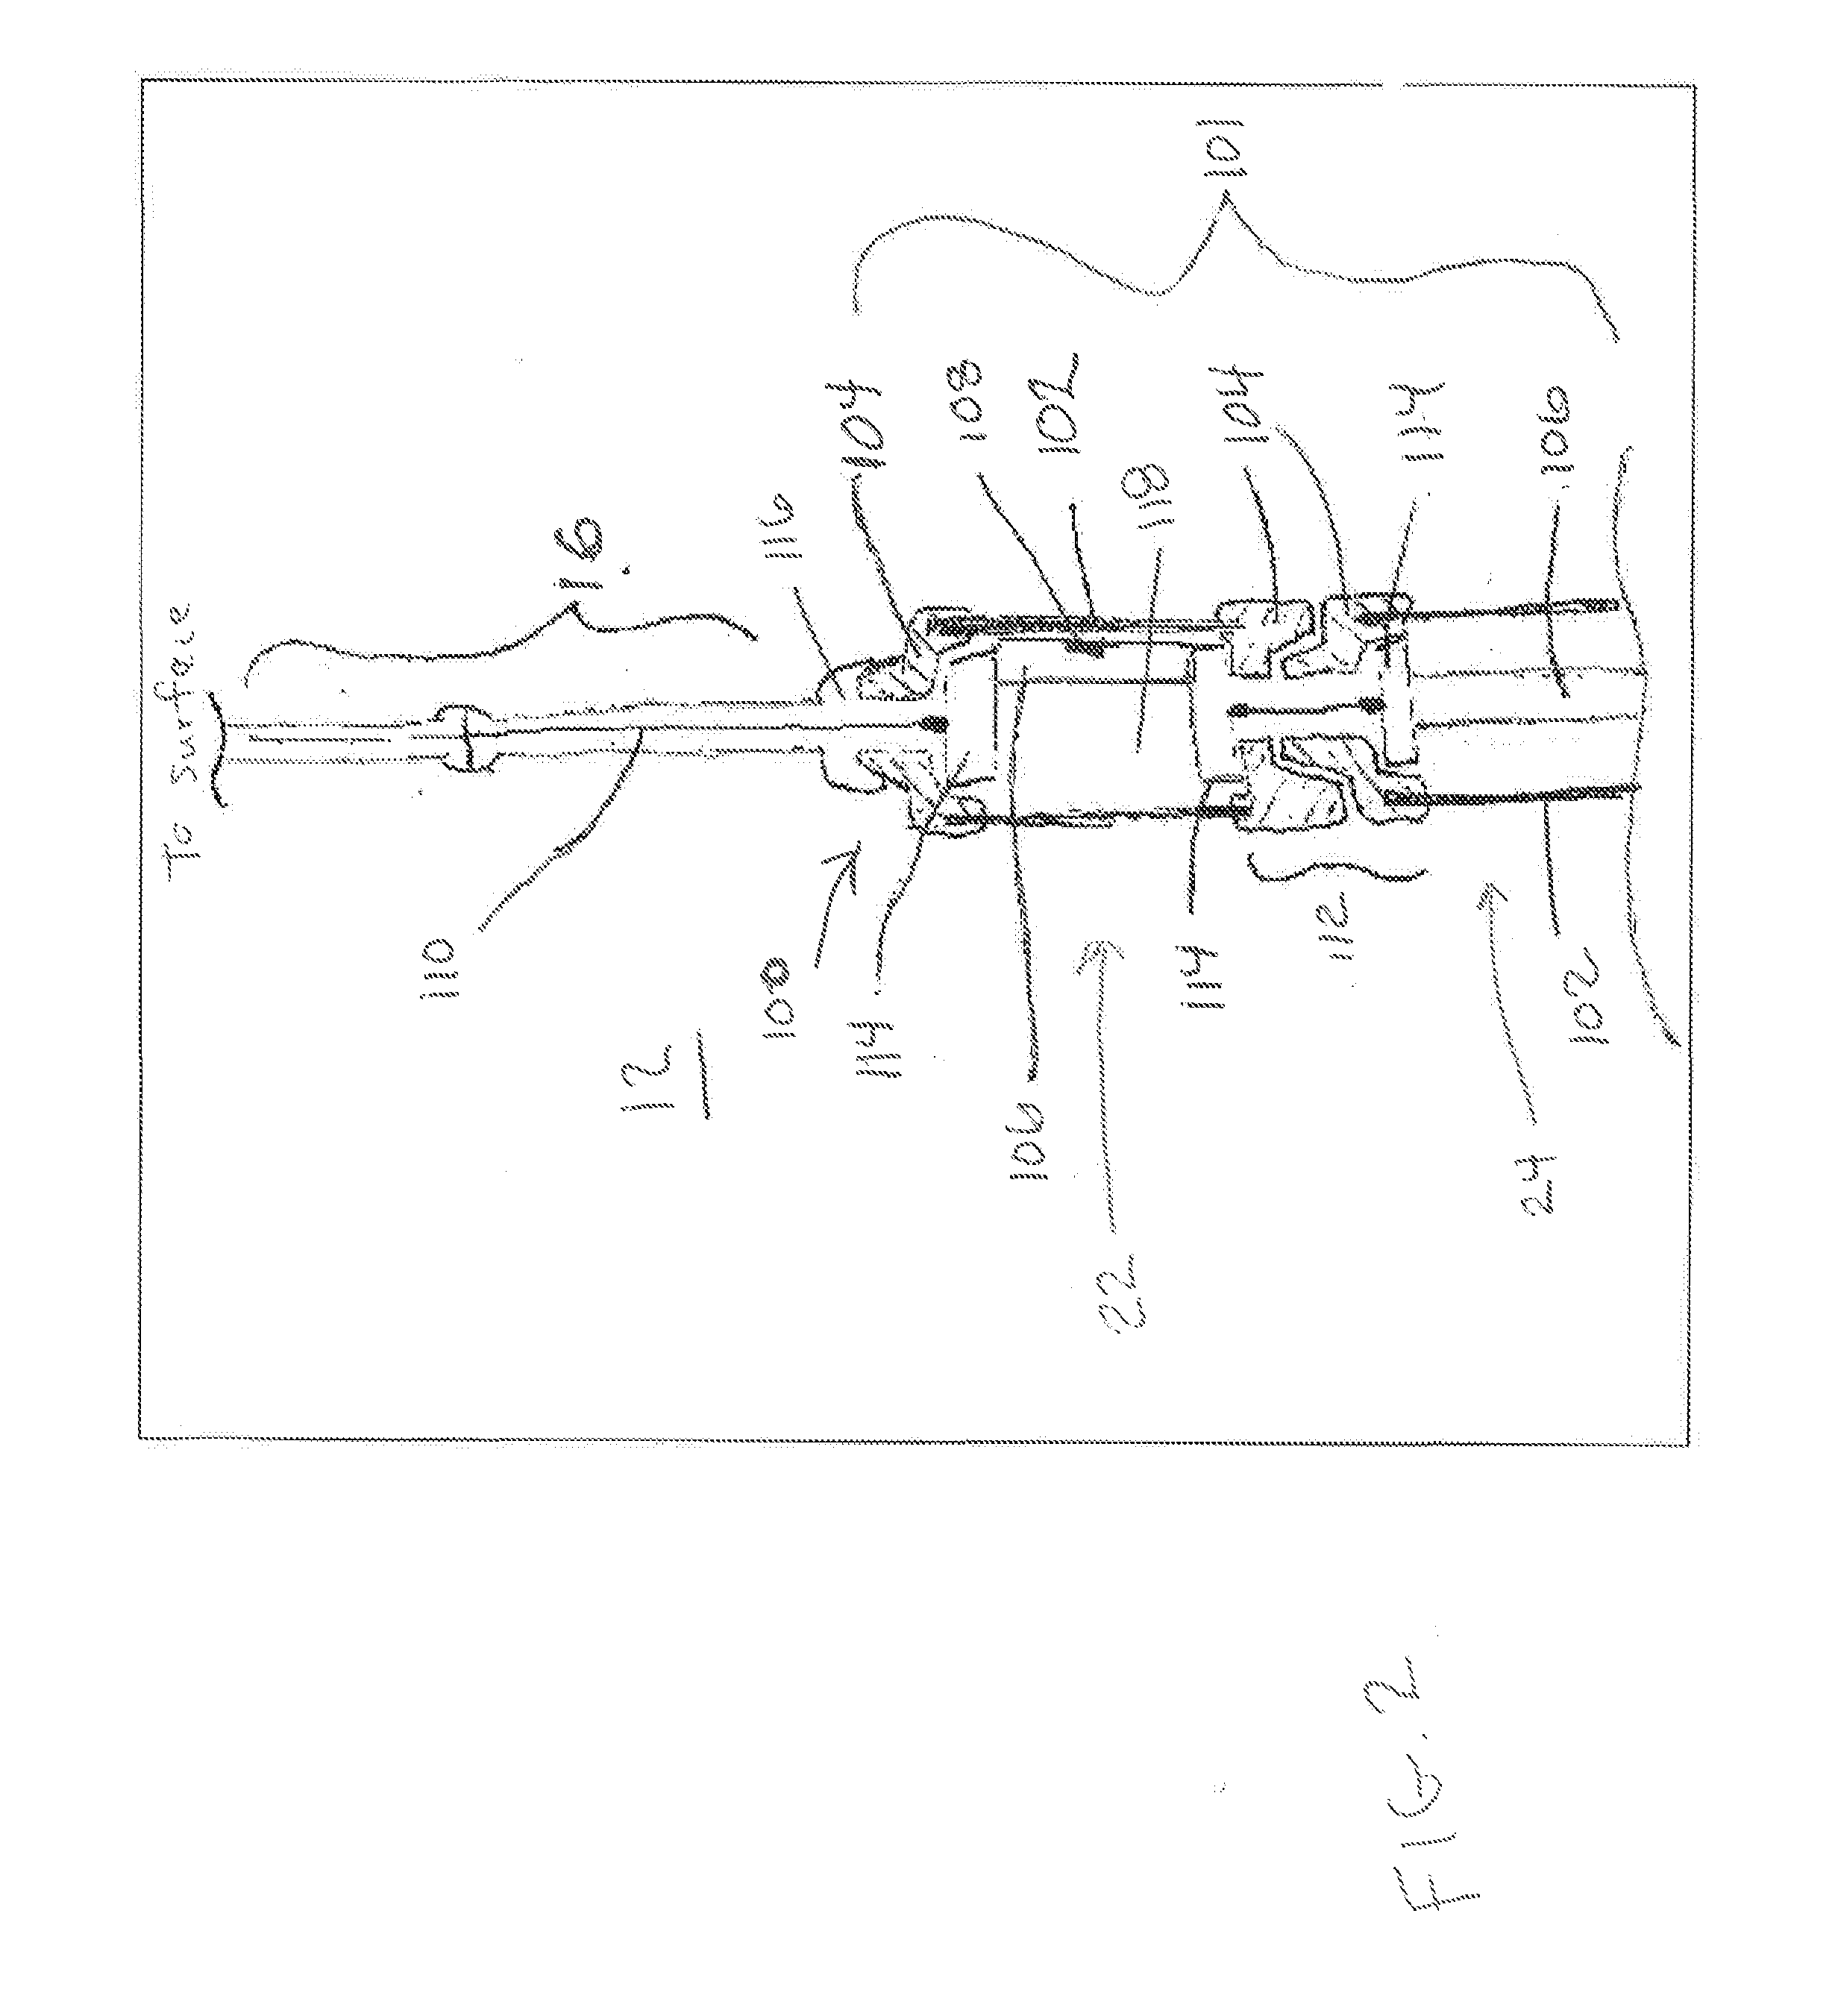 Systems and Methods for Collecting One or More Measurements in a Borehole